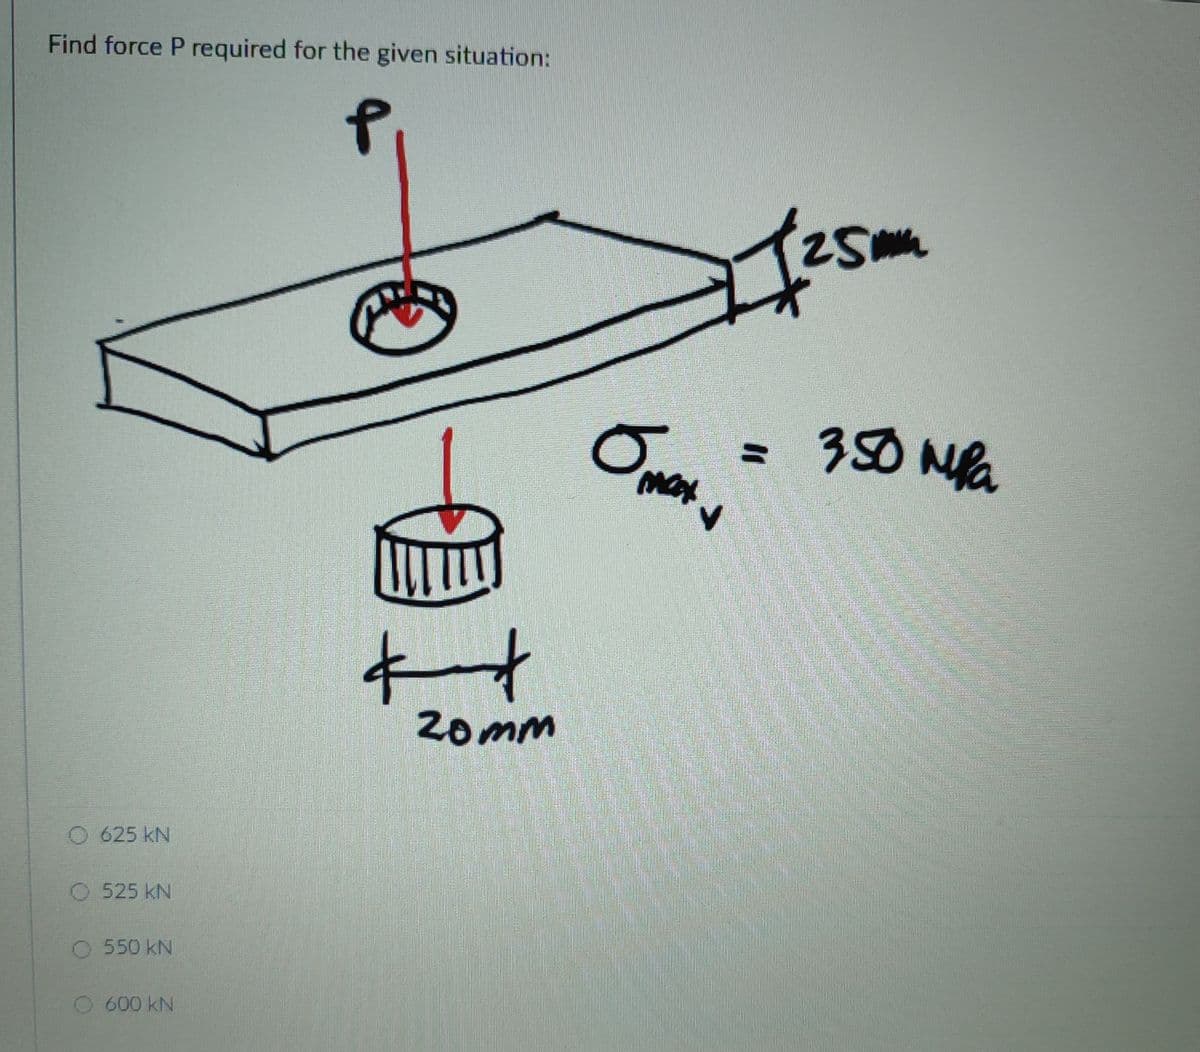 Find force P required for the given situation:
25
=D350 NPa
20mm
625 kN
O 525 kN
550 kN
600 kN
